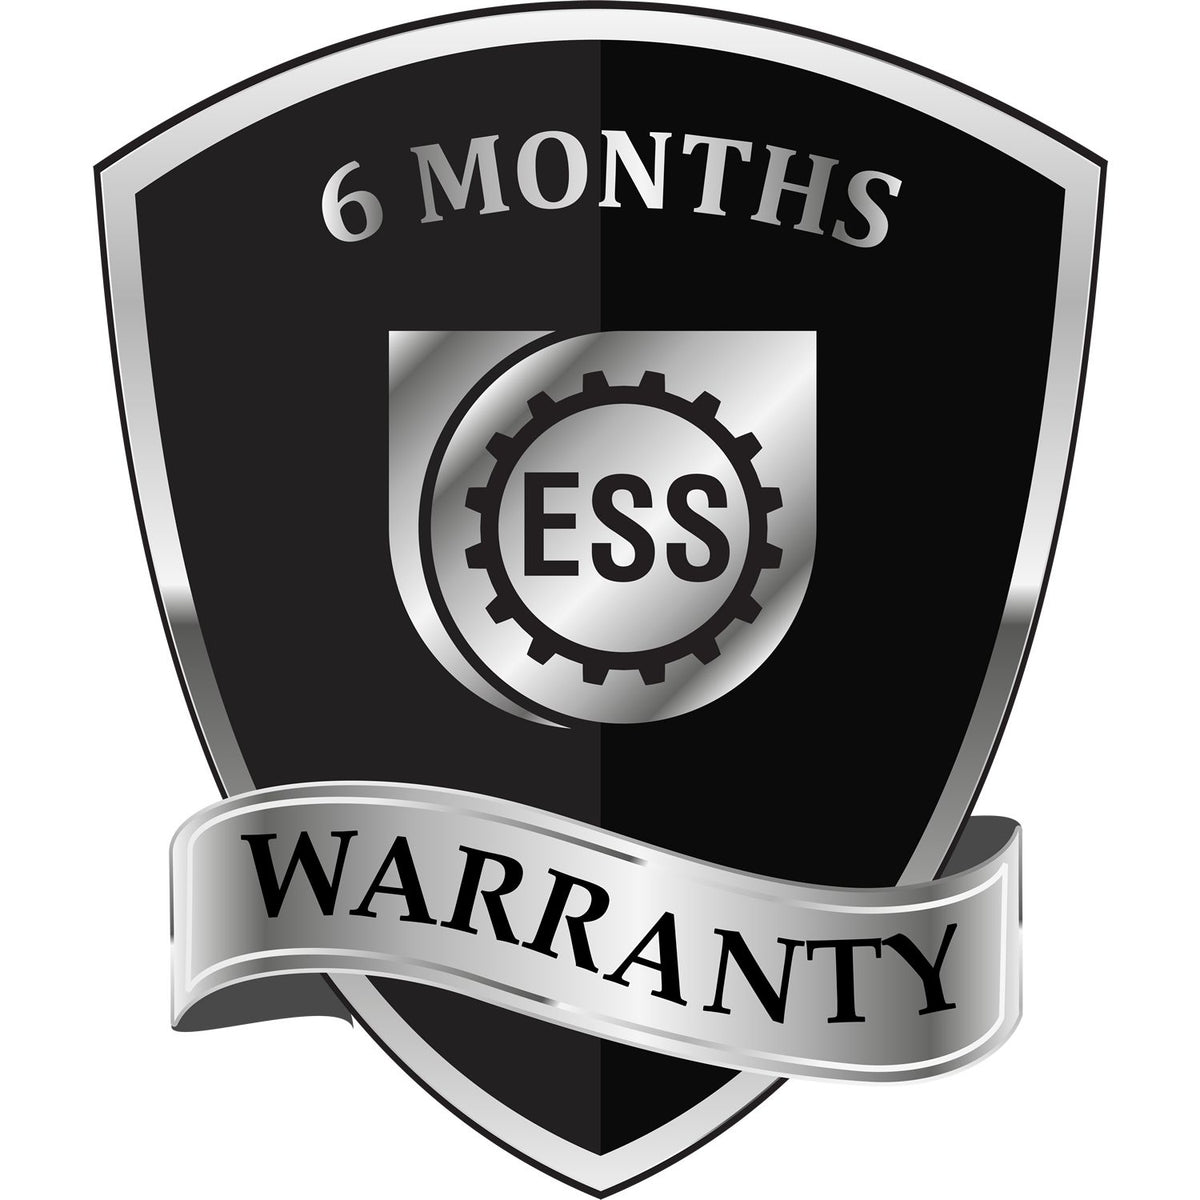 A black and silver badge or emblem showing warranty information for the Minnesota Professional Geologist Seal Stamp